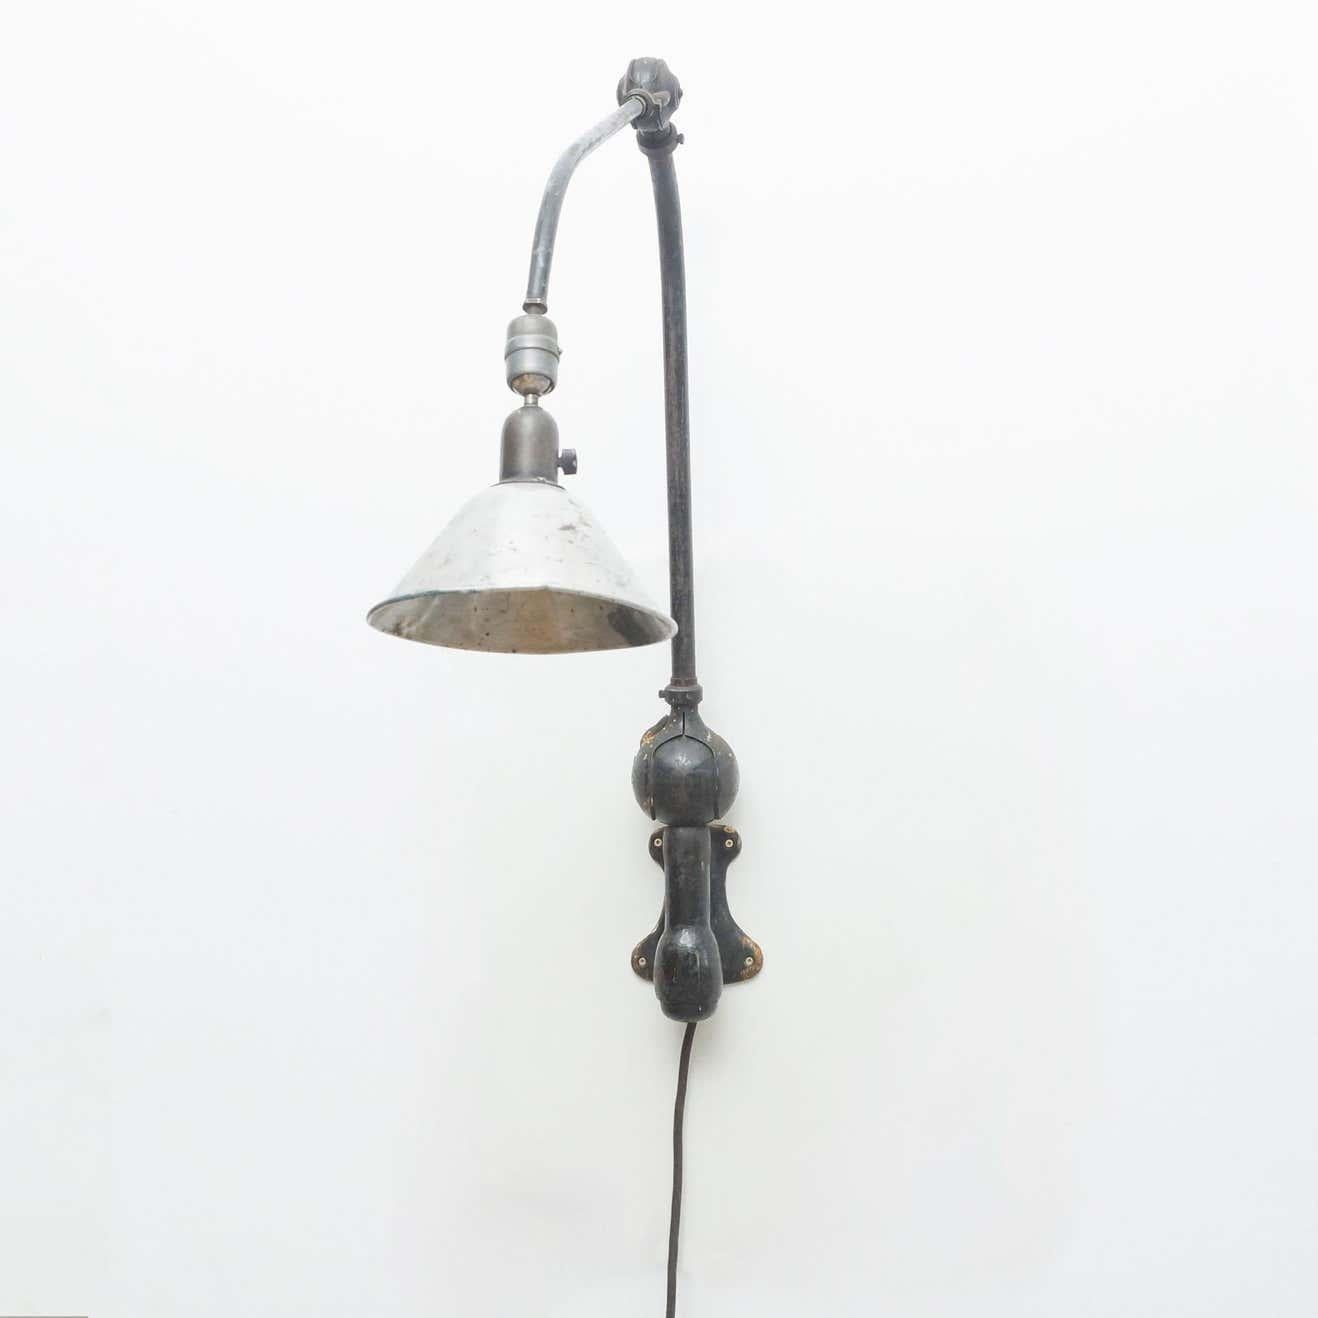 Wall lamp designed by Johan Petter Johansson.
Manufactured by Triplex (Sweden), circa 1930.
Aluminium and steel.

In good original condition with minor wear consistent with age and use, preserving a beautiful patina.

This lamp is wired for